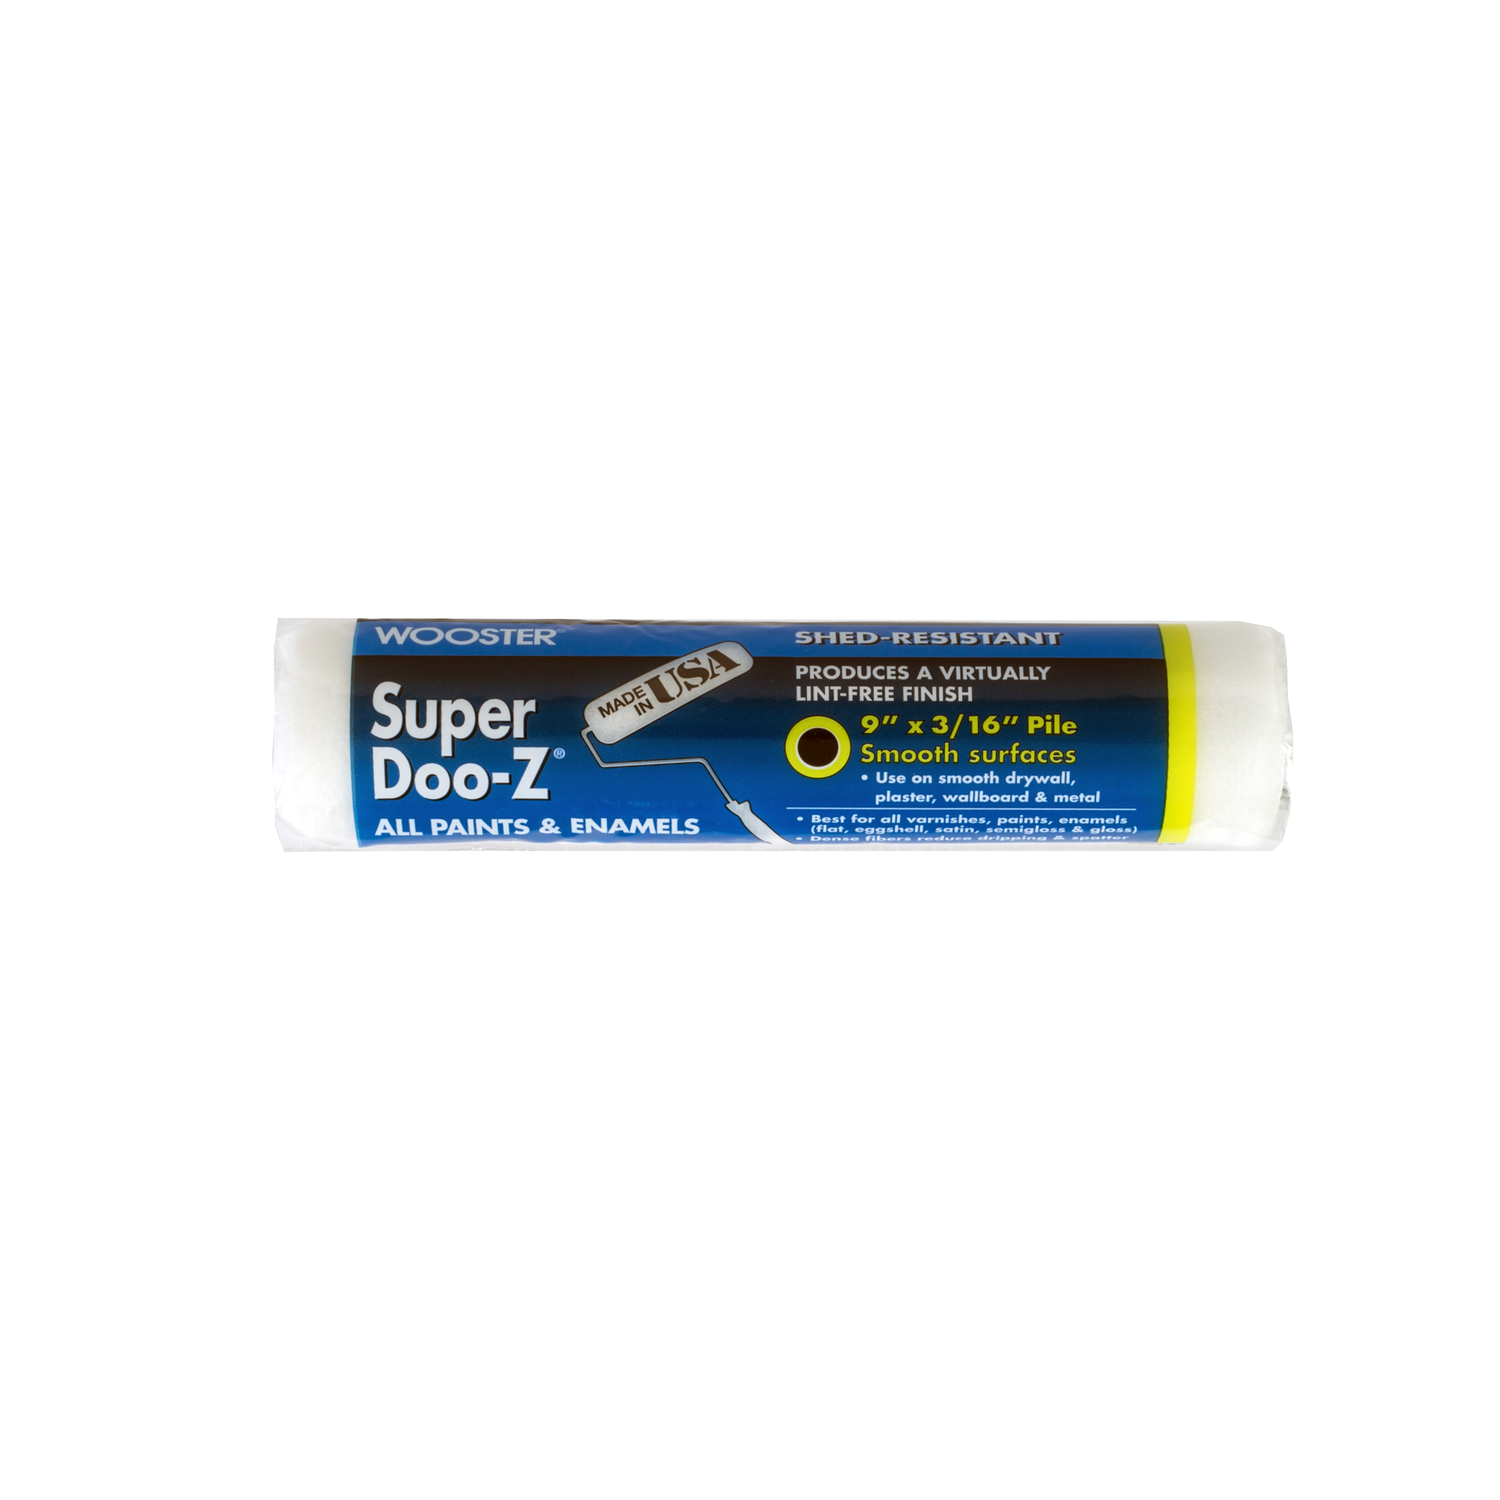 Photos - Putty Knife / Painting Tool Wooster Super Doo-Z Fabric 9 in. W X 3/16 in. Regular Paint Roller Cover 1